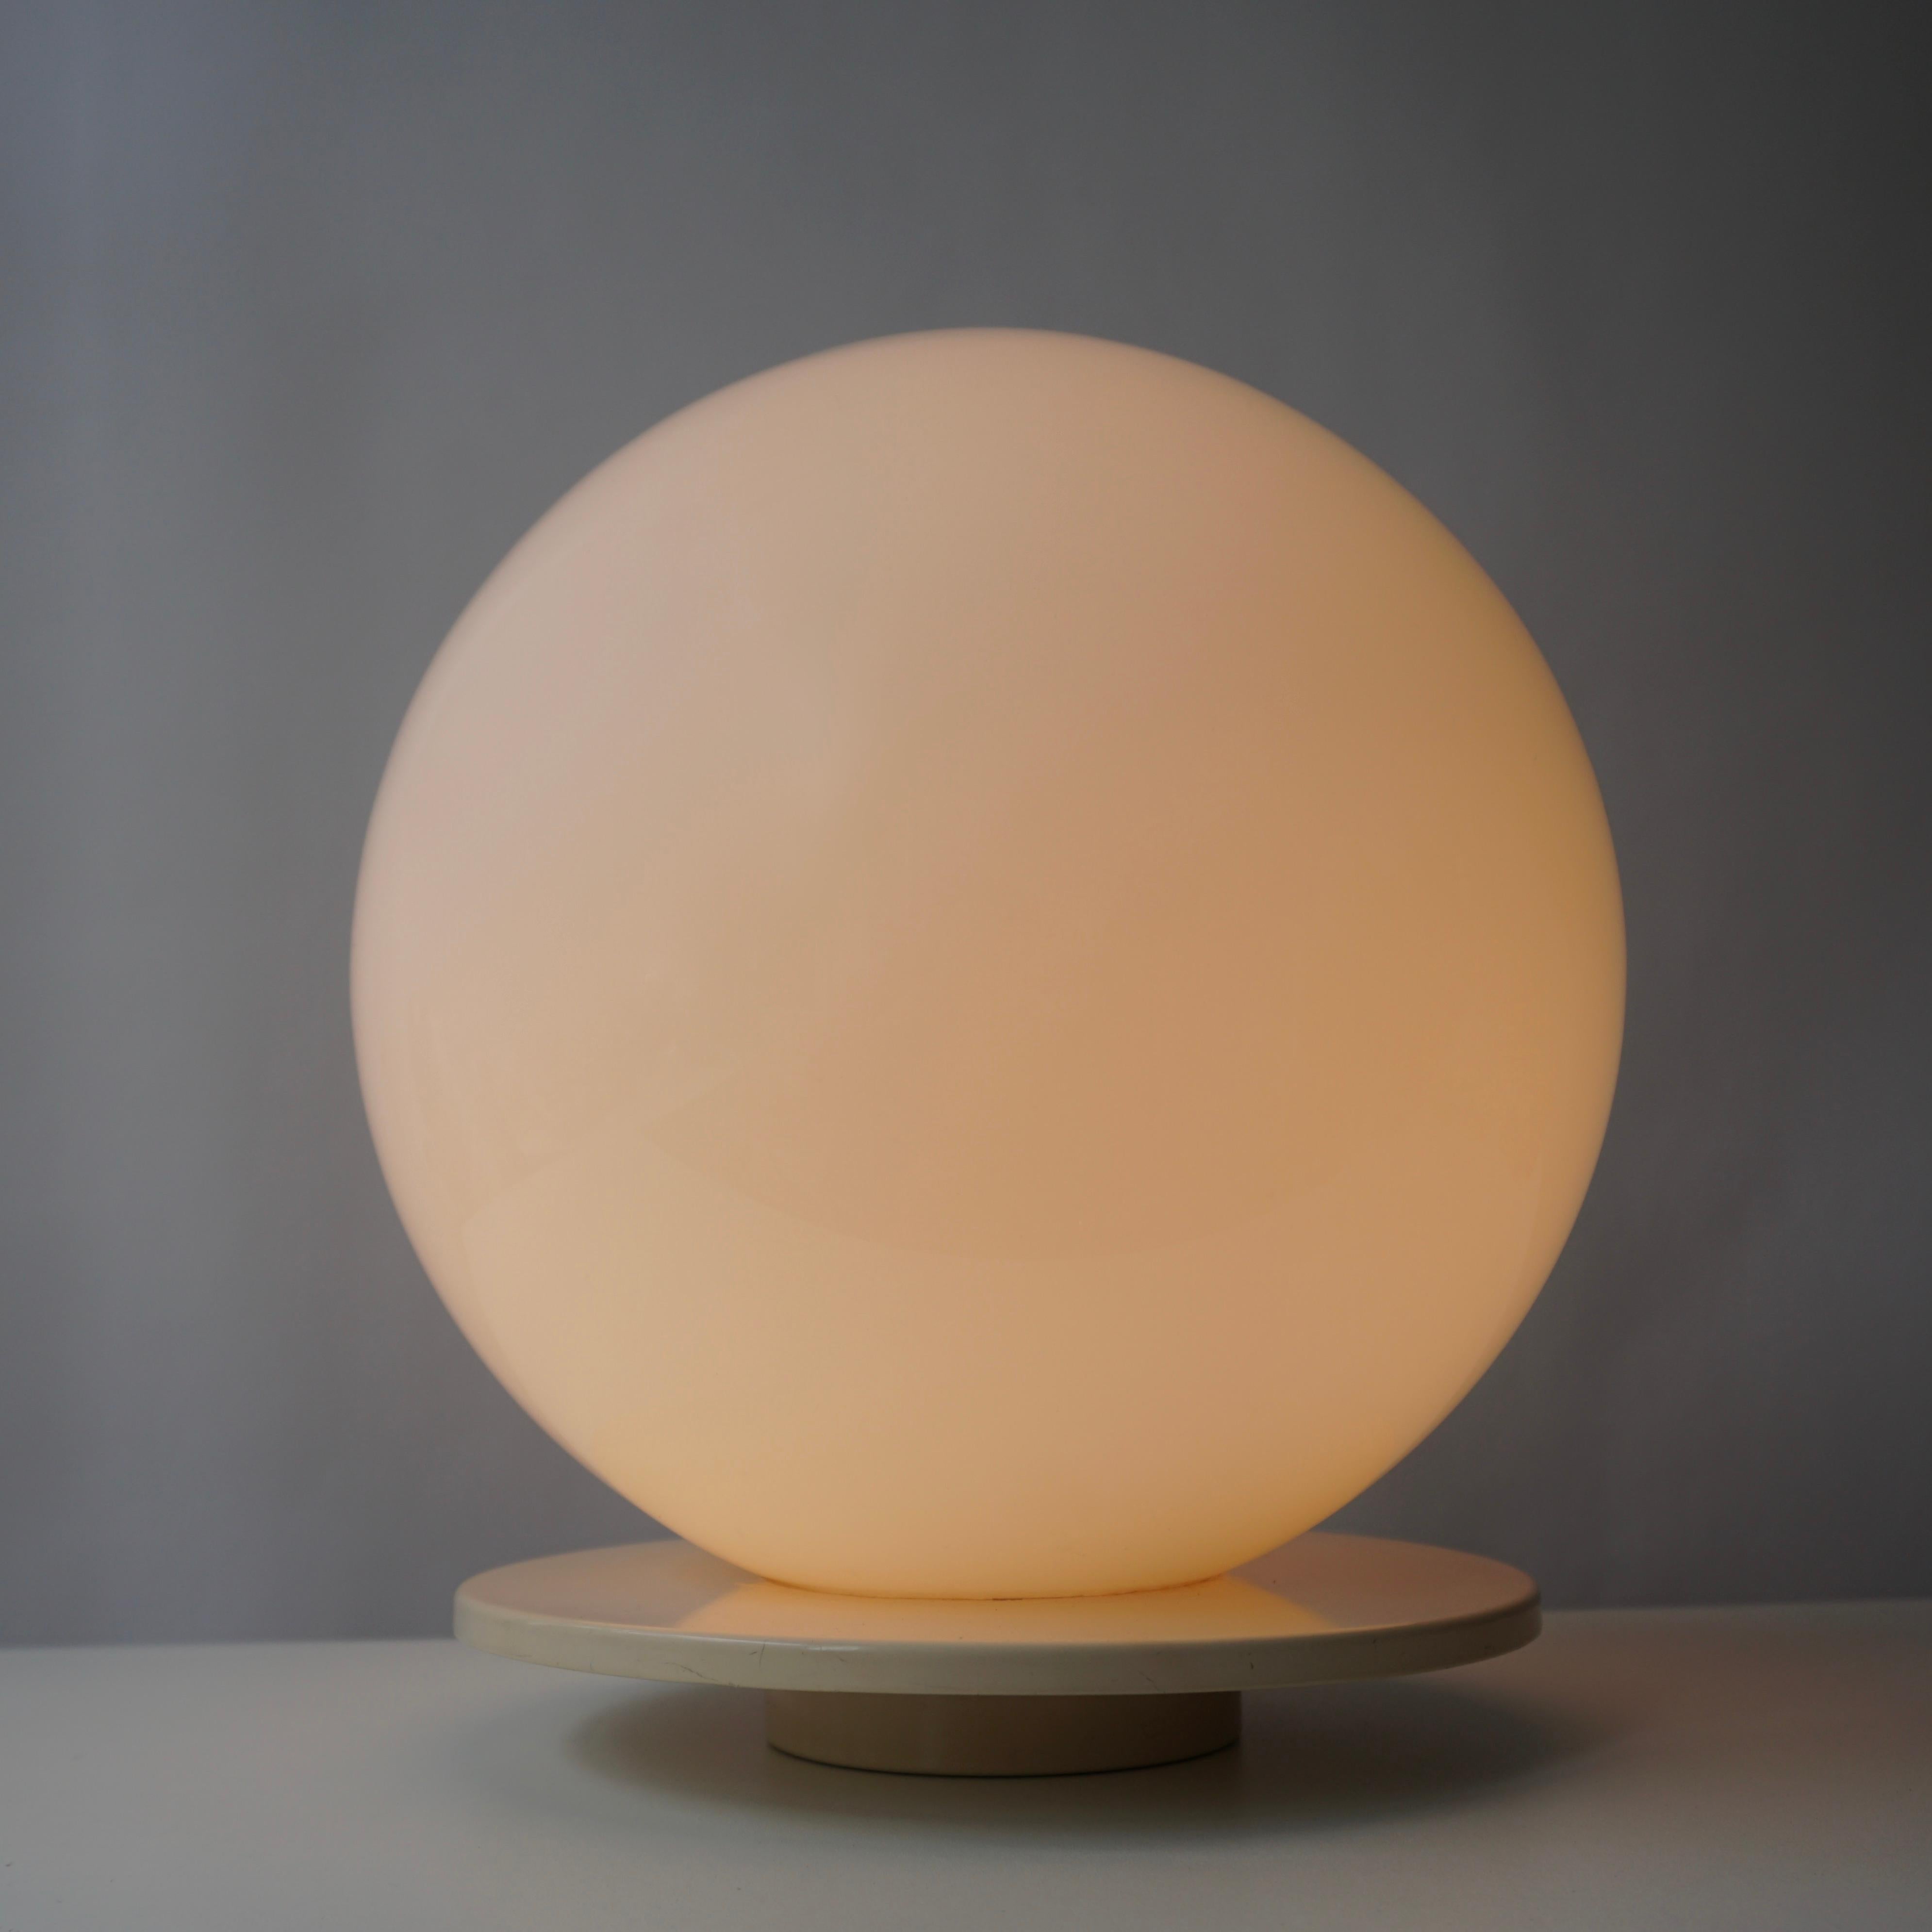 Murano glass globe shaped table lamp into a plastic base.
Measures: Diameter 30 cm.
Height 33cm.